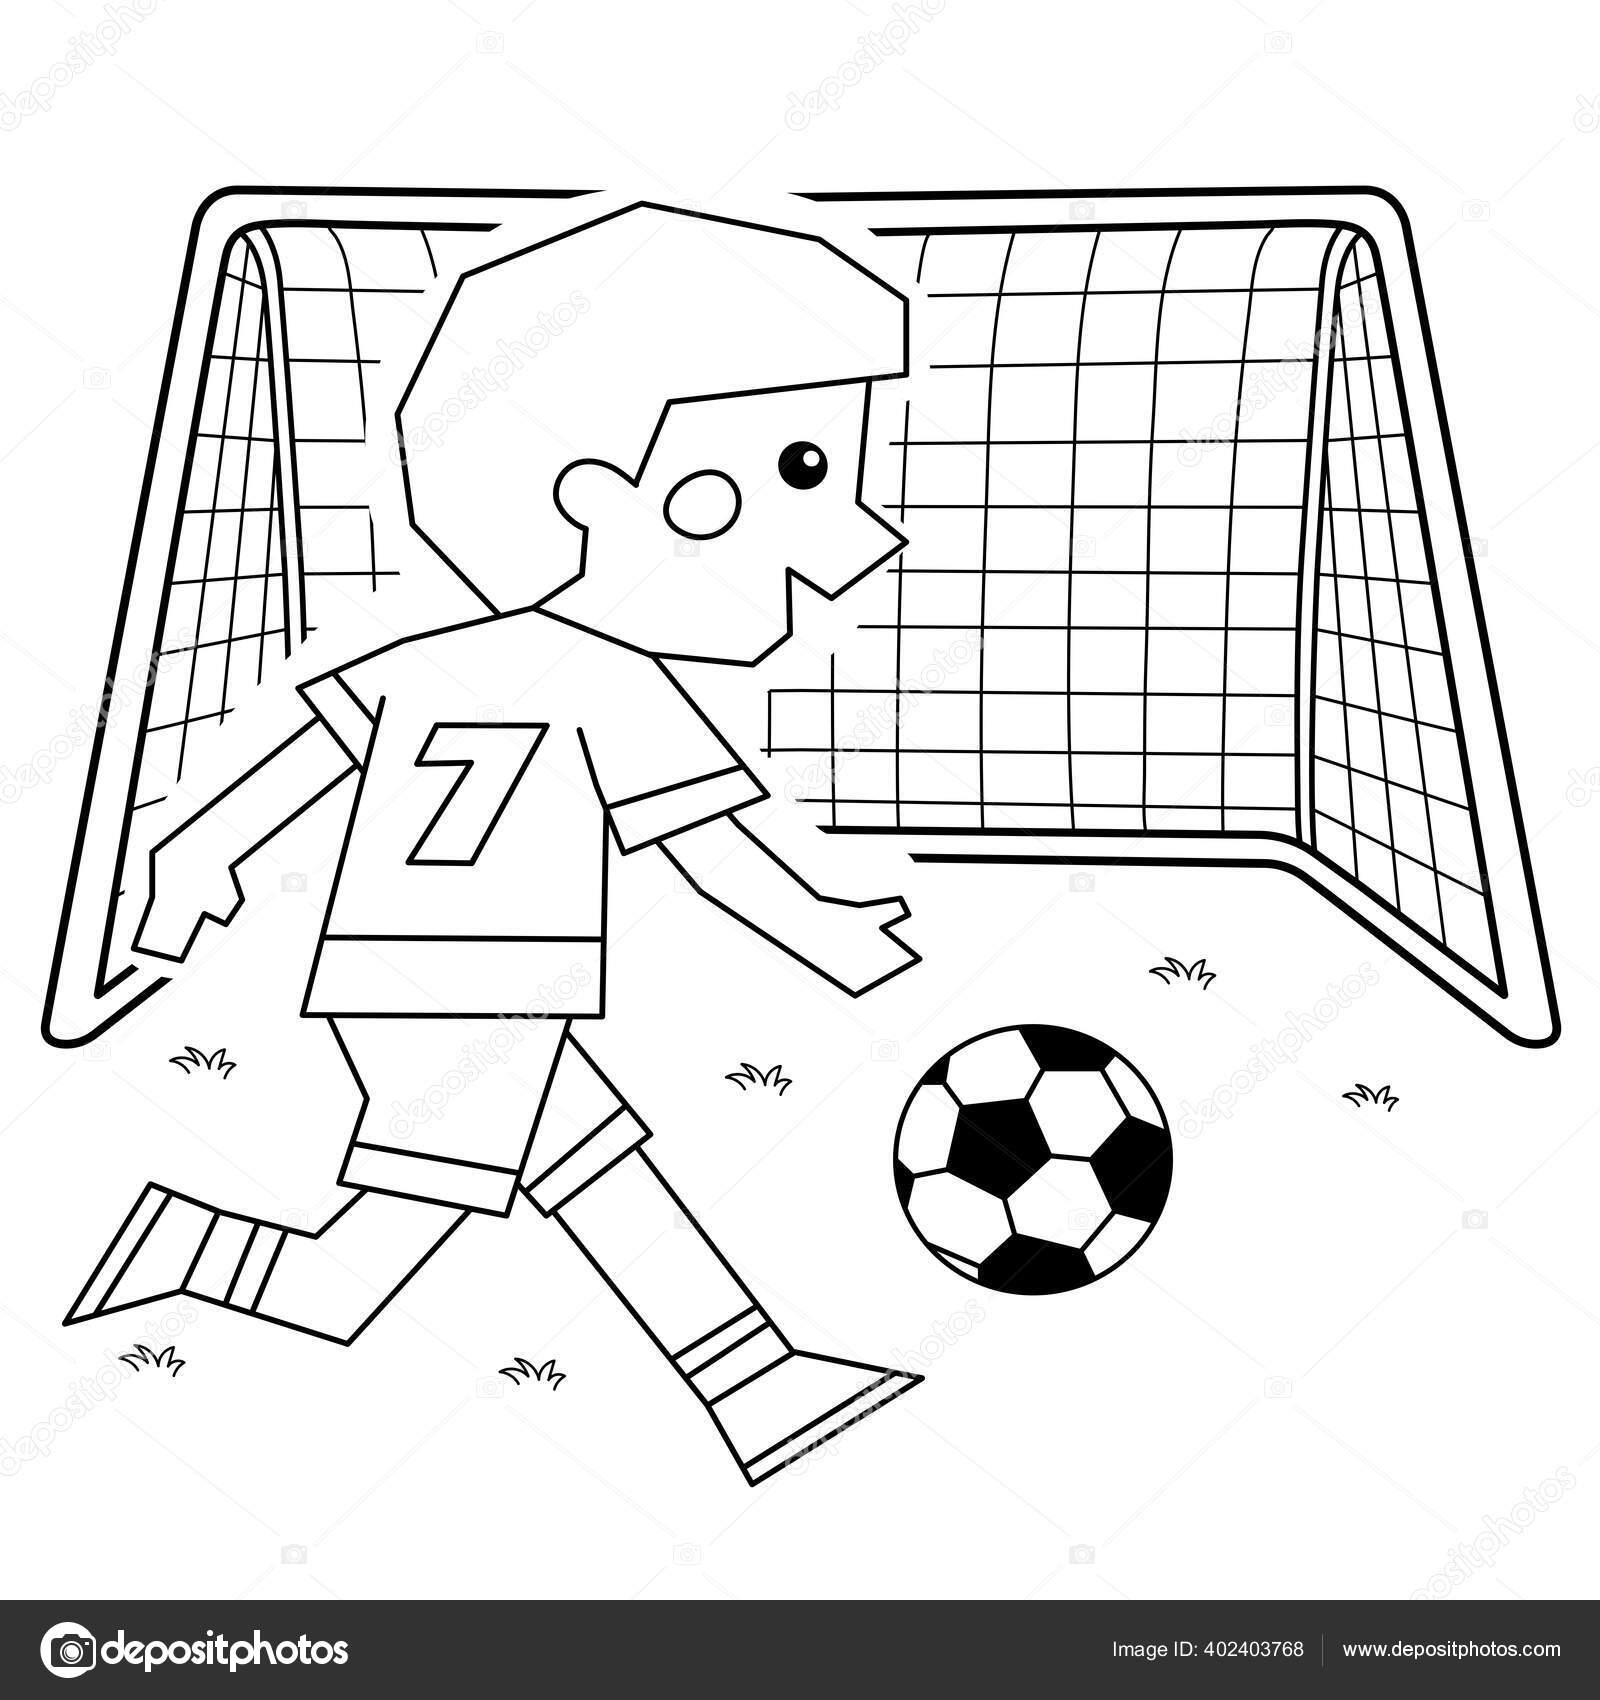 Coloring Page Outline Cartoon Boy Soccer Ball Football Goal Coloring Vector Image By C Oleon17 Vector Stock